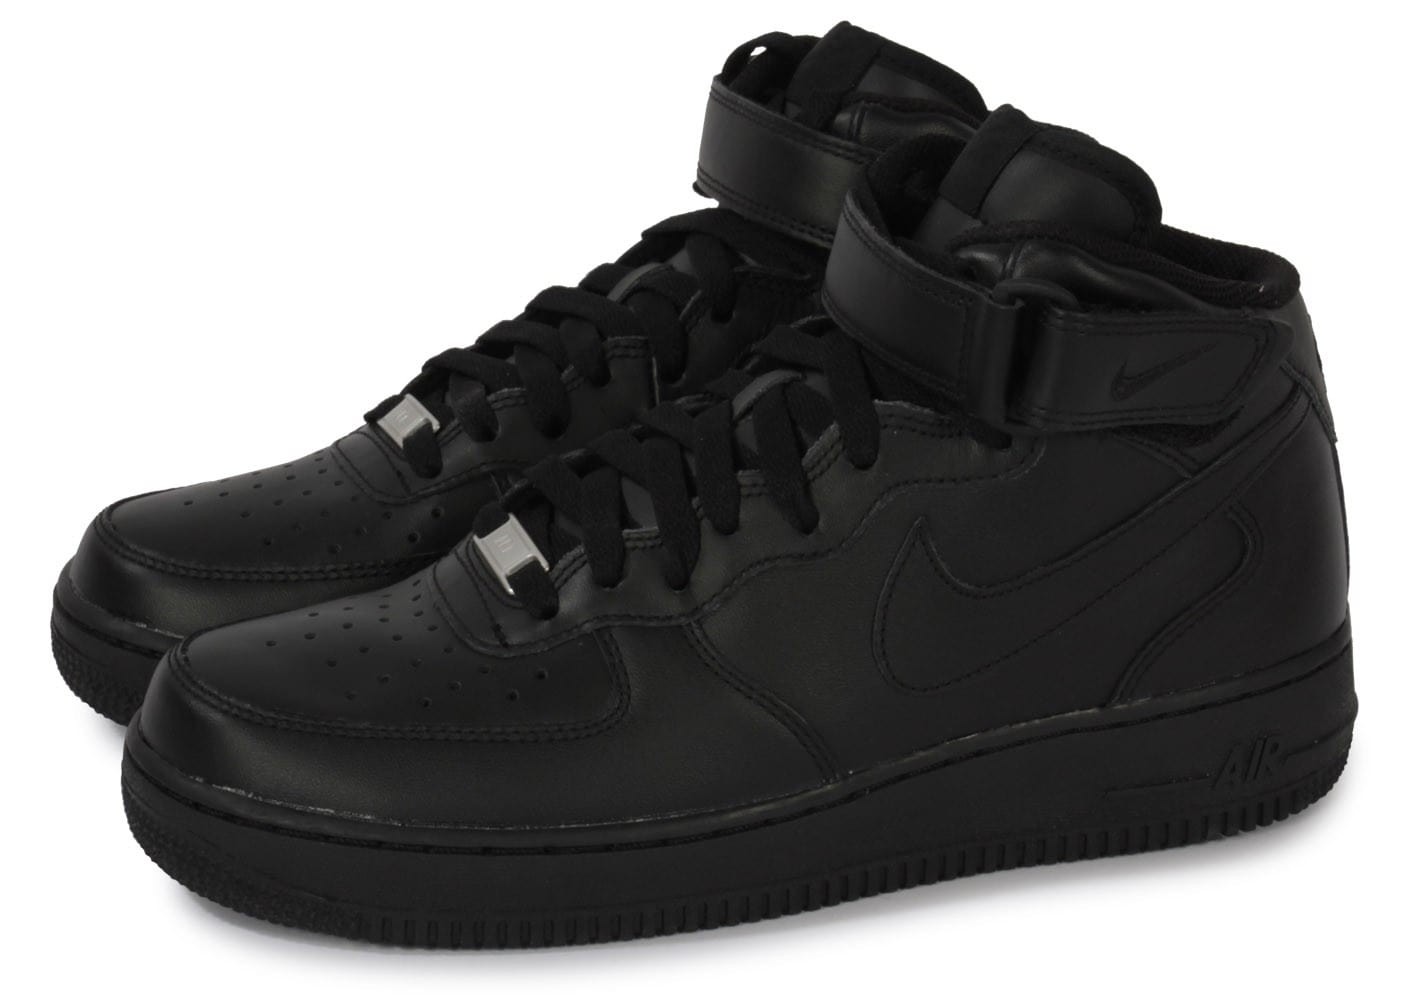 nike air force 1 mid homme Abordable，Nike AIR FORCE 1 MID 07 NOIRE Chaussures Homme Chausport en ligne.